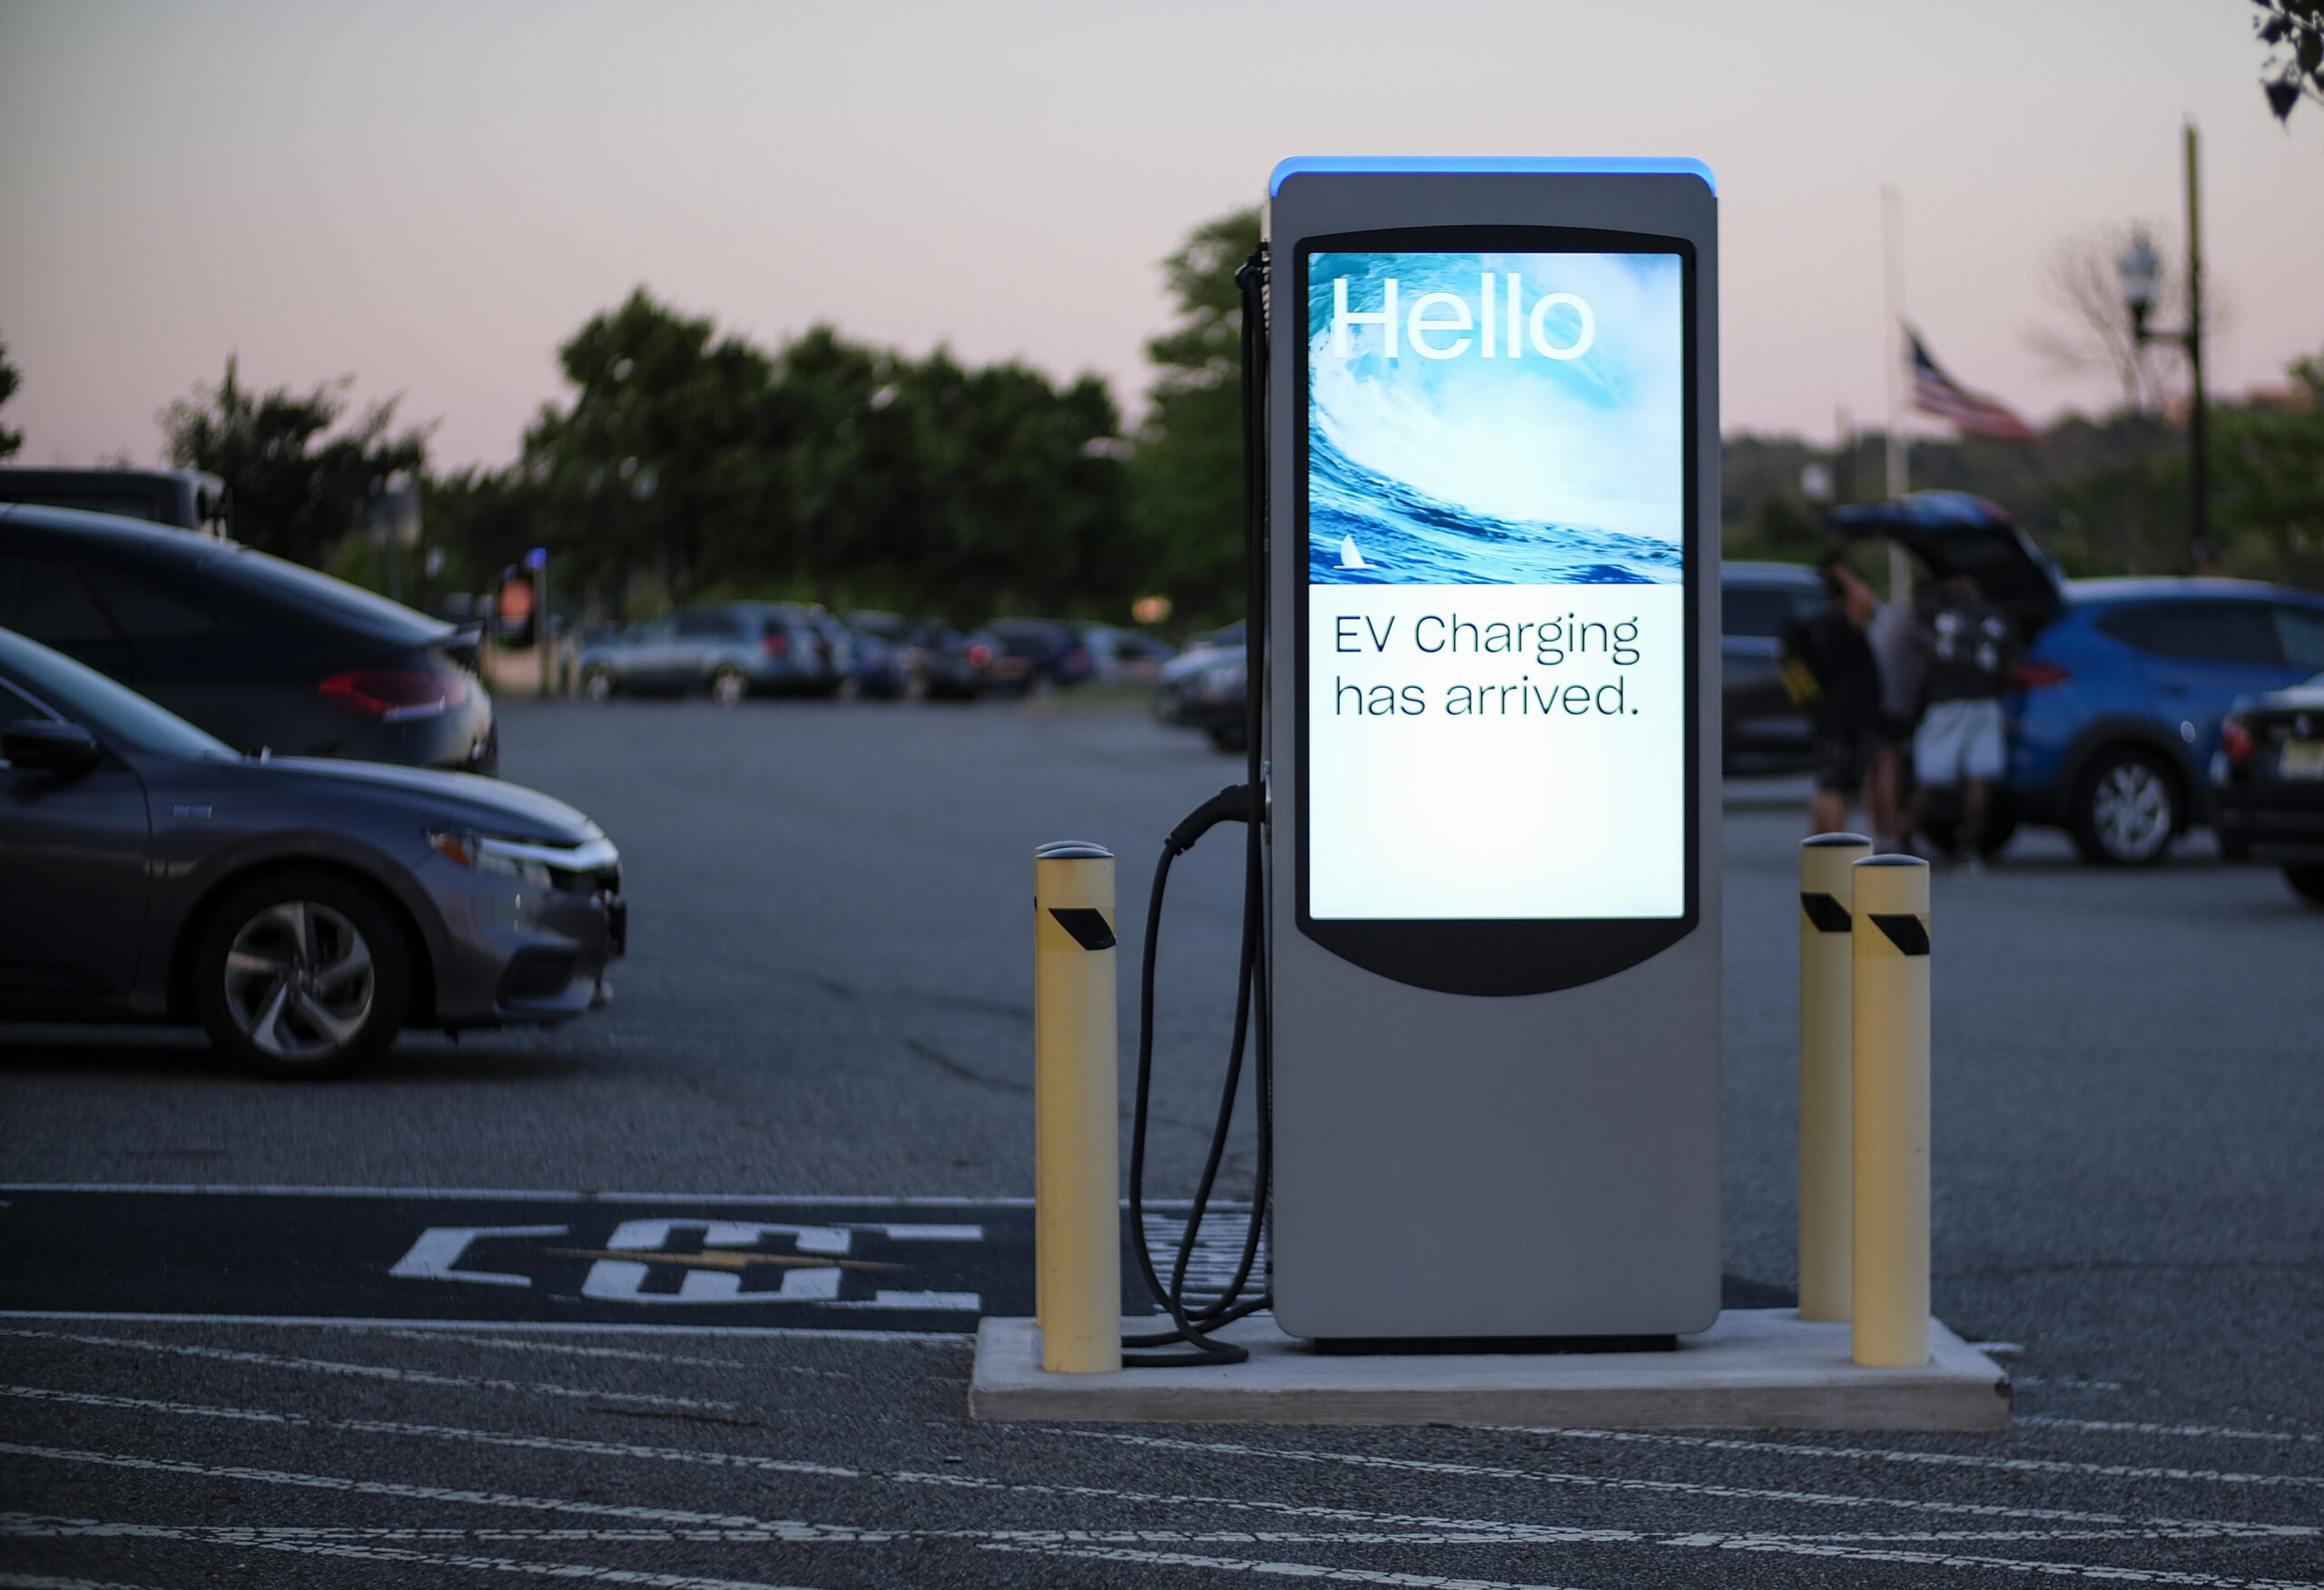 An EV charging station in a parking lot displays &quot;Hello, EV Charging has arrived.&quot; Cars and trees are in the background.